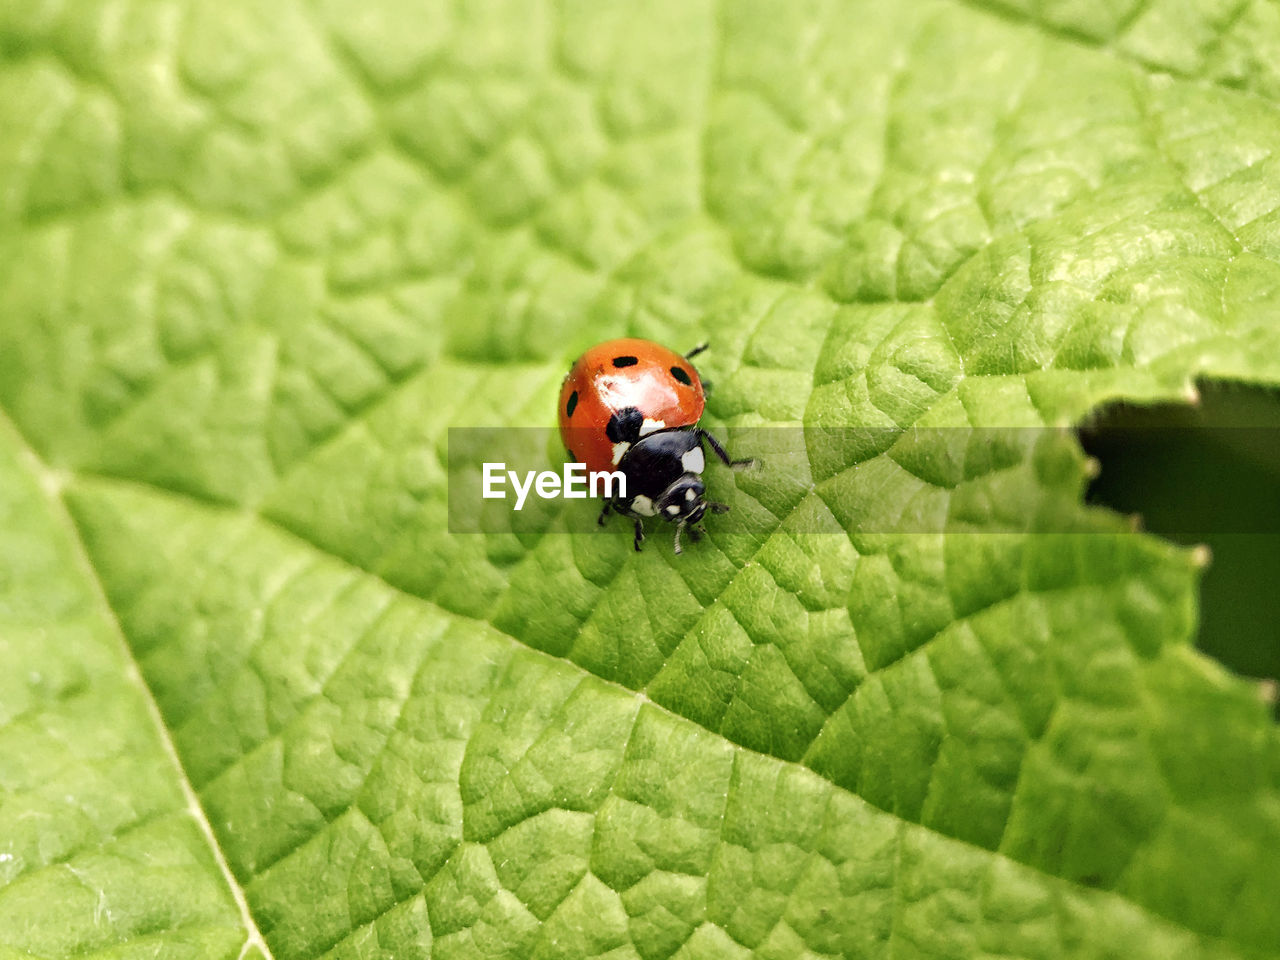 HIGH ANGLE VIEW OF INSECT ON LEAF